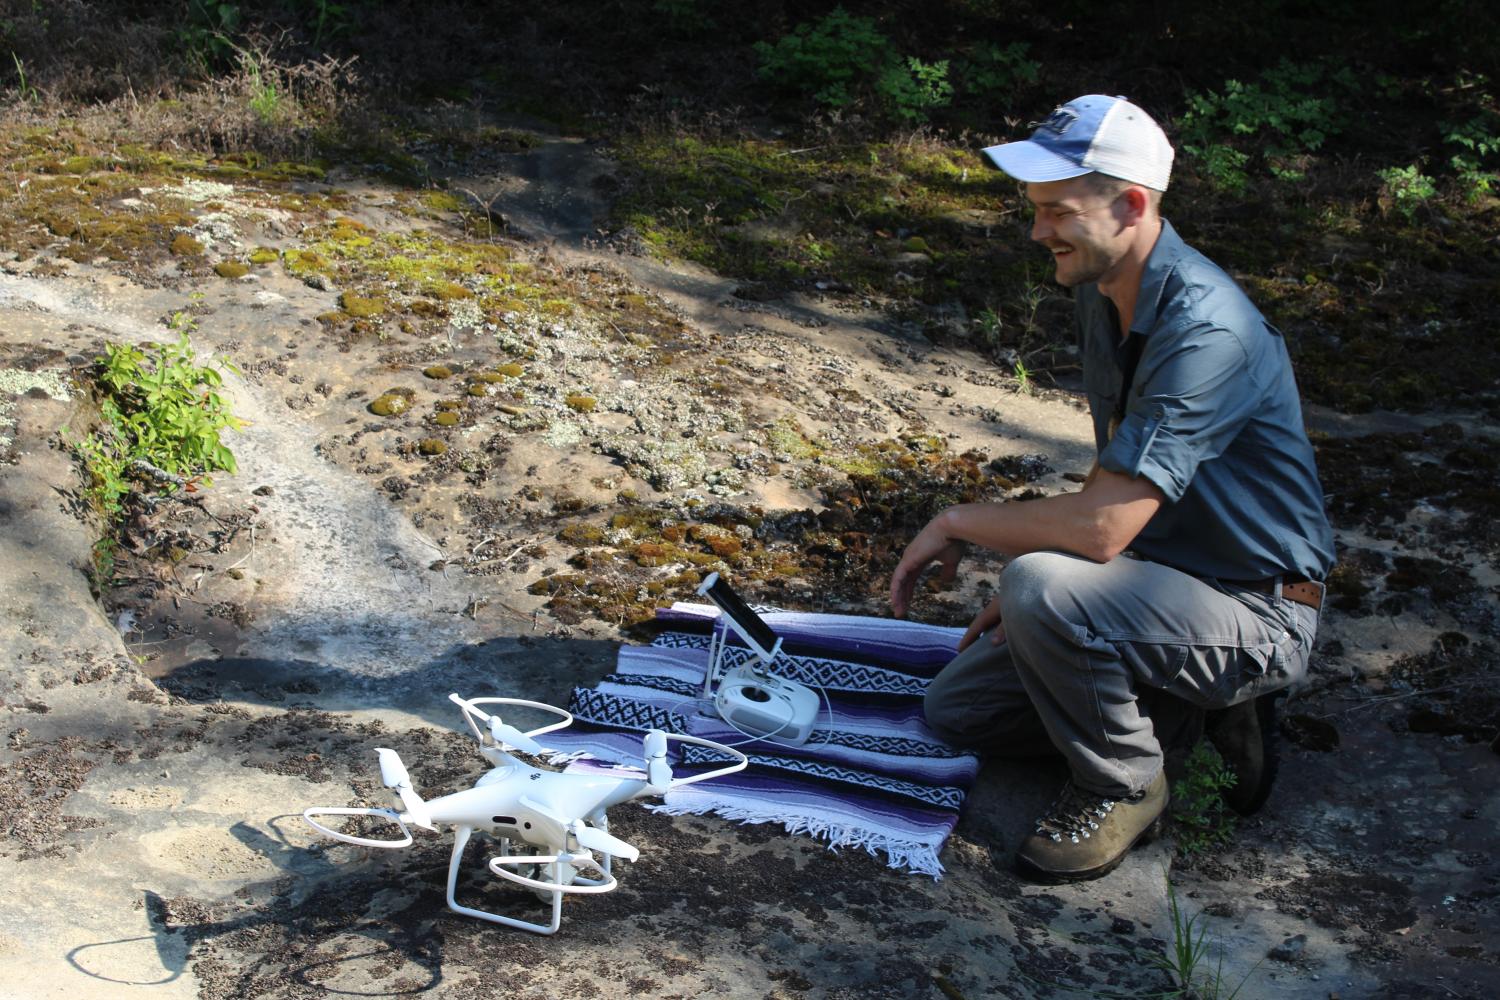 A man crouches next to a drone preparing to take flight